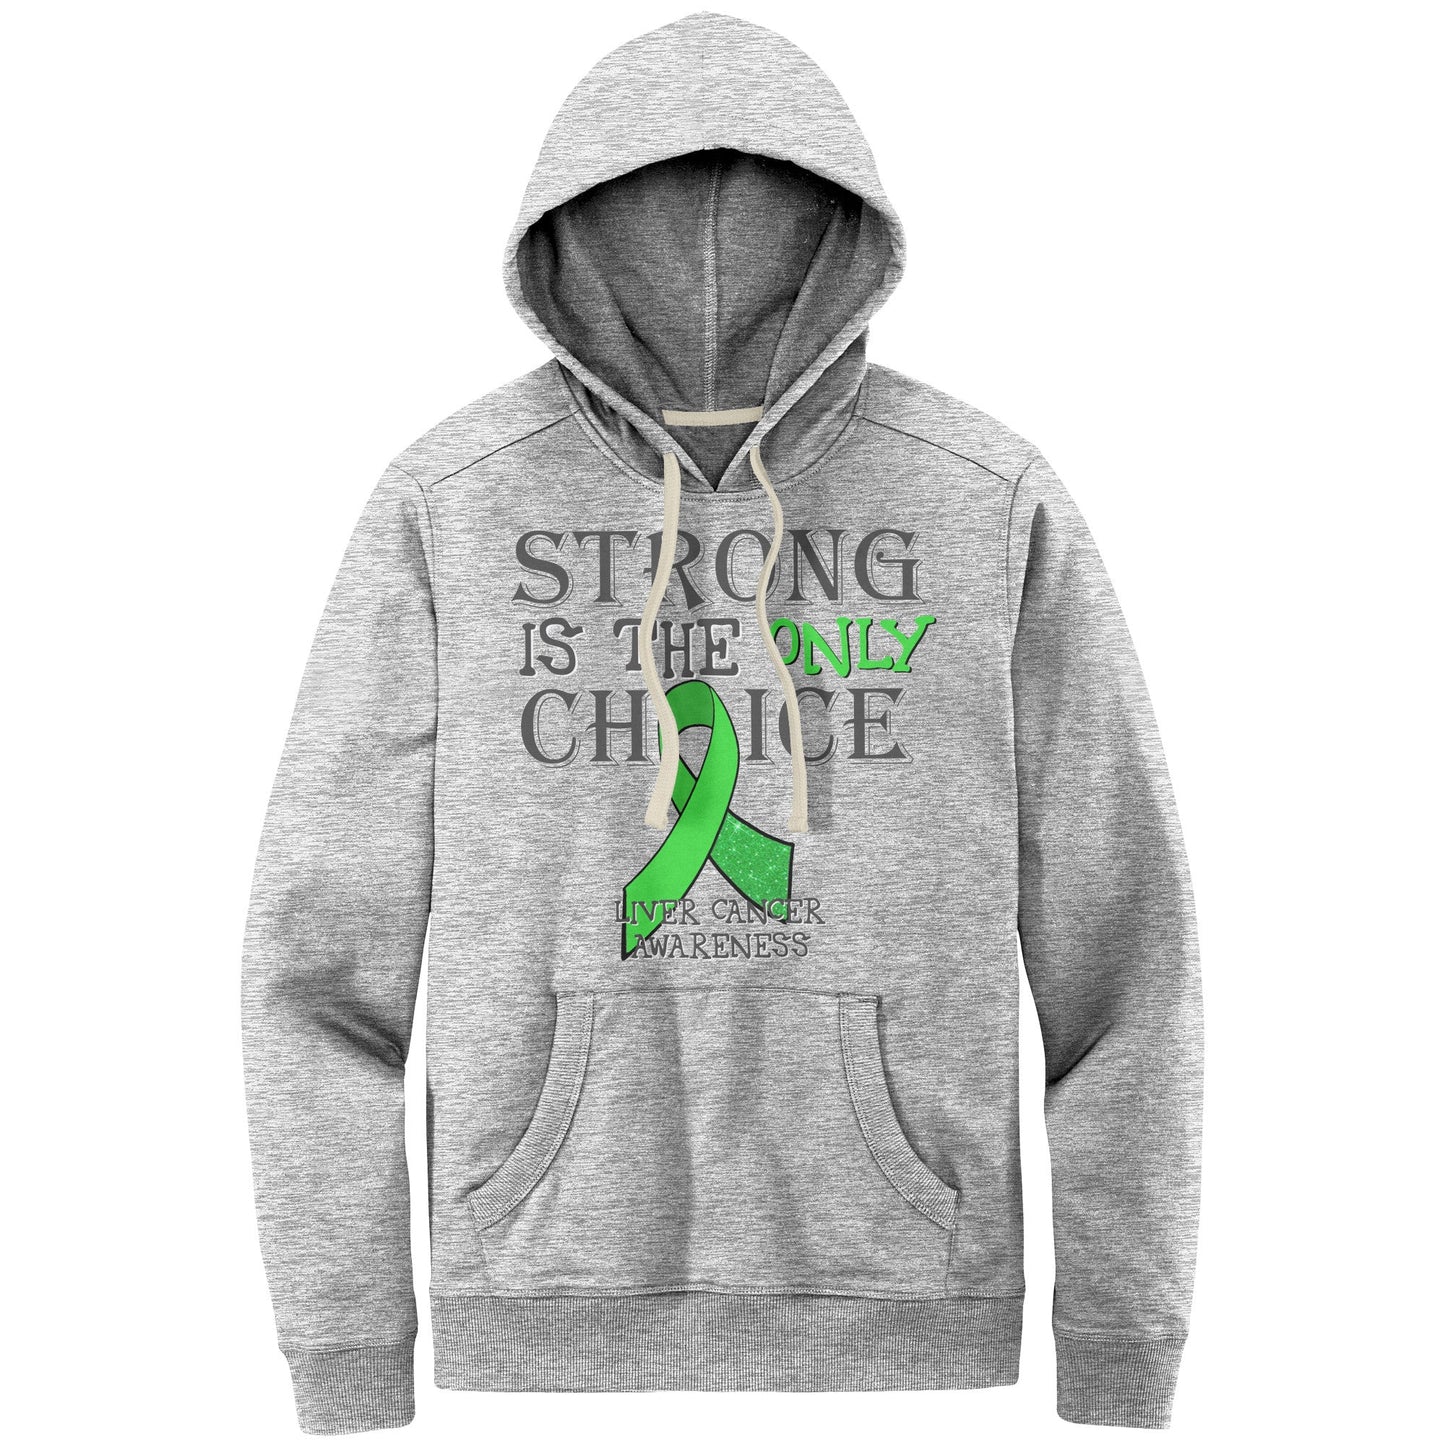 Strong is the Only Choice -Liver Cancer Awareness T-Shirt, Hoodie, Tank |x|